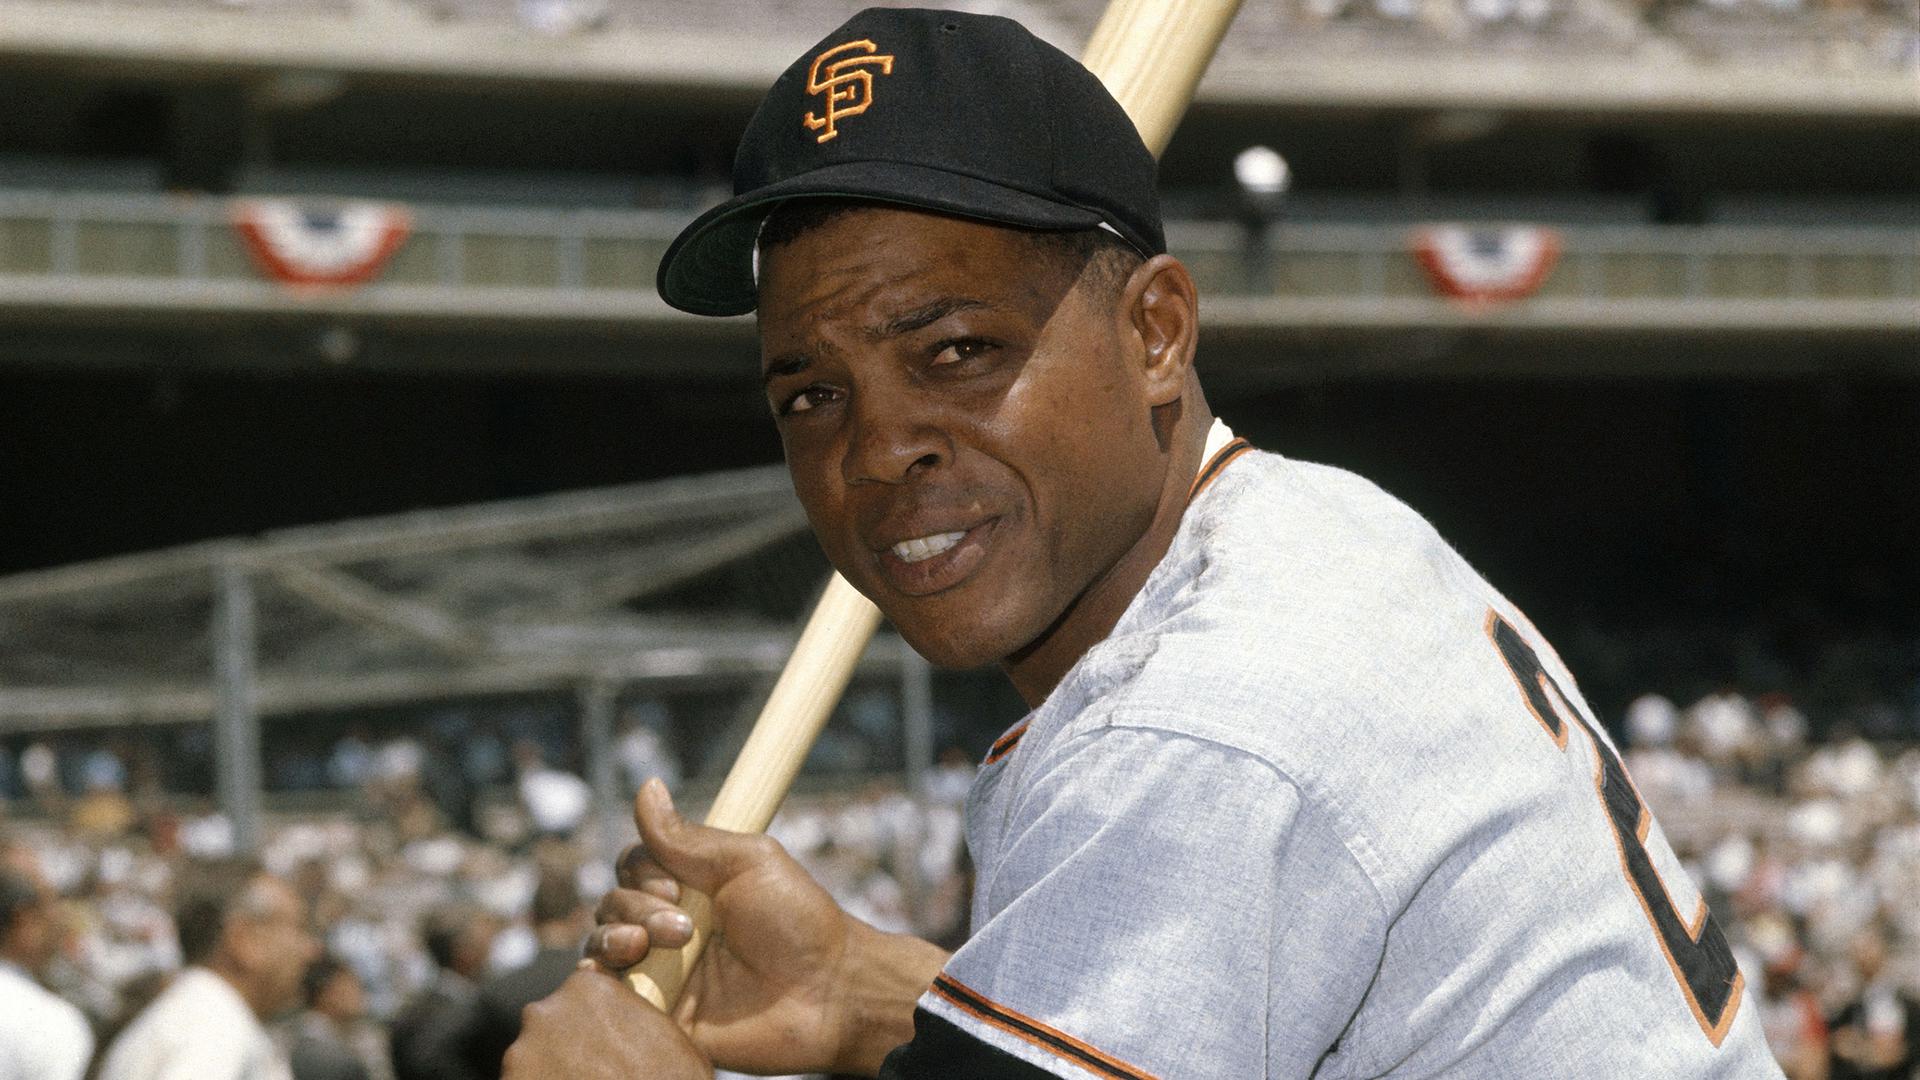 Willie Mays poses, bat in hands, in a vintage photo